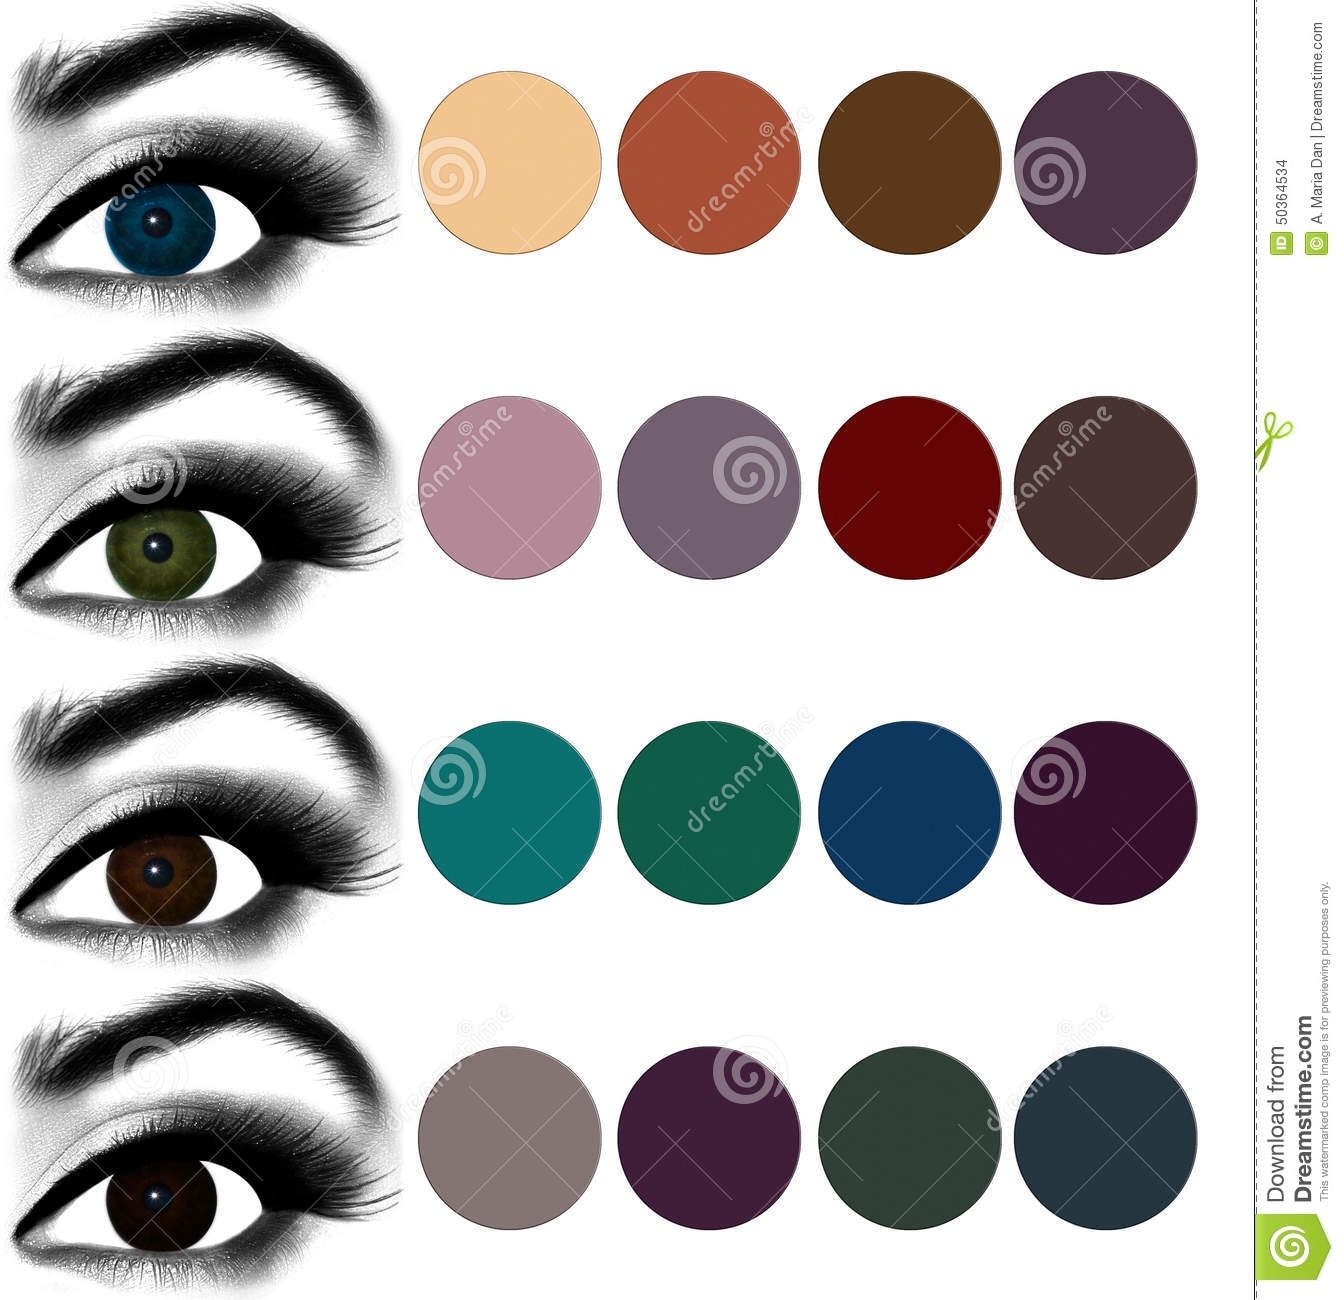 Eyes Makeup.matching Eyeshadow To Eye Color. Stock with Eyeshadow Colors For Brown Green Eyes